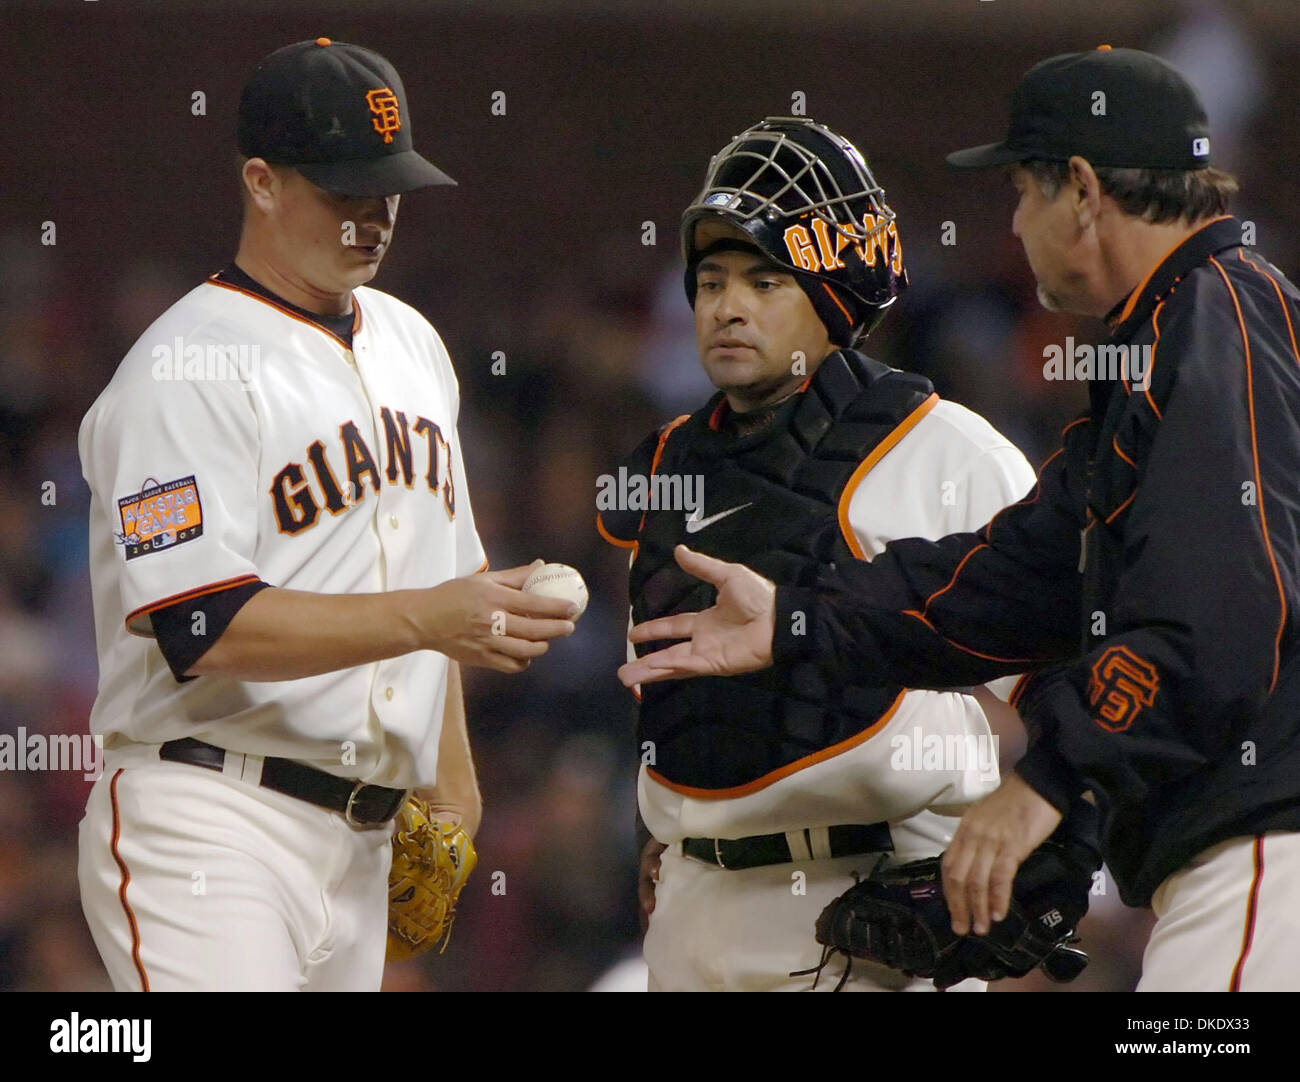 May 25, 2007 - San Francisco, CA, USA - San Francisco Giants pitcher MATT CAIN, #18, hands the ball to manager BRUCE BOCHY, #15, as catcher BENGIE MOLINA,#1, watches in the 7th inning of their game  against the Colorado Rockies on Friday, May 25, 2007 at AT&T Park in San Francisco, Calif. (Credit Image: © Jose Carlos Fajardo/Contra Costa Times/ZUMA Press) RESTRICTIONS: USA Tabloids Stock Photo